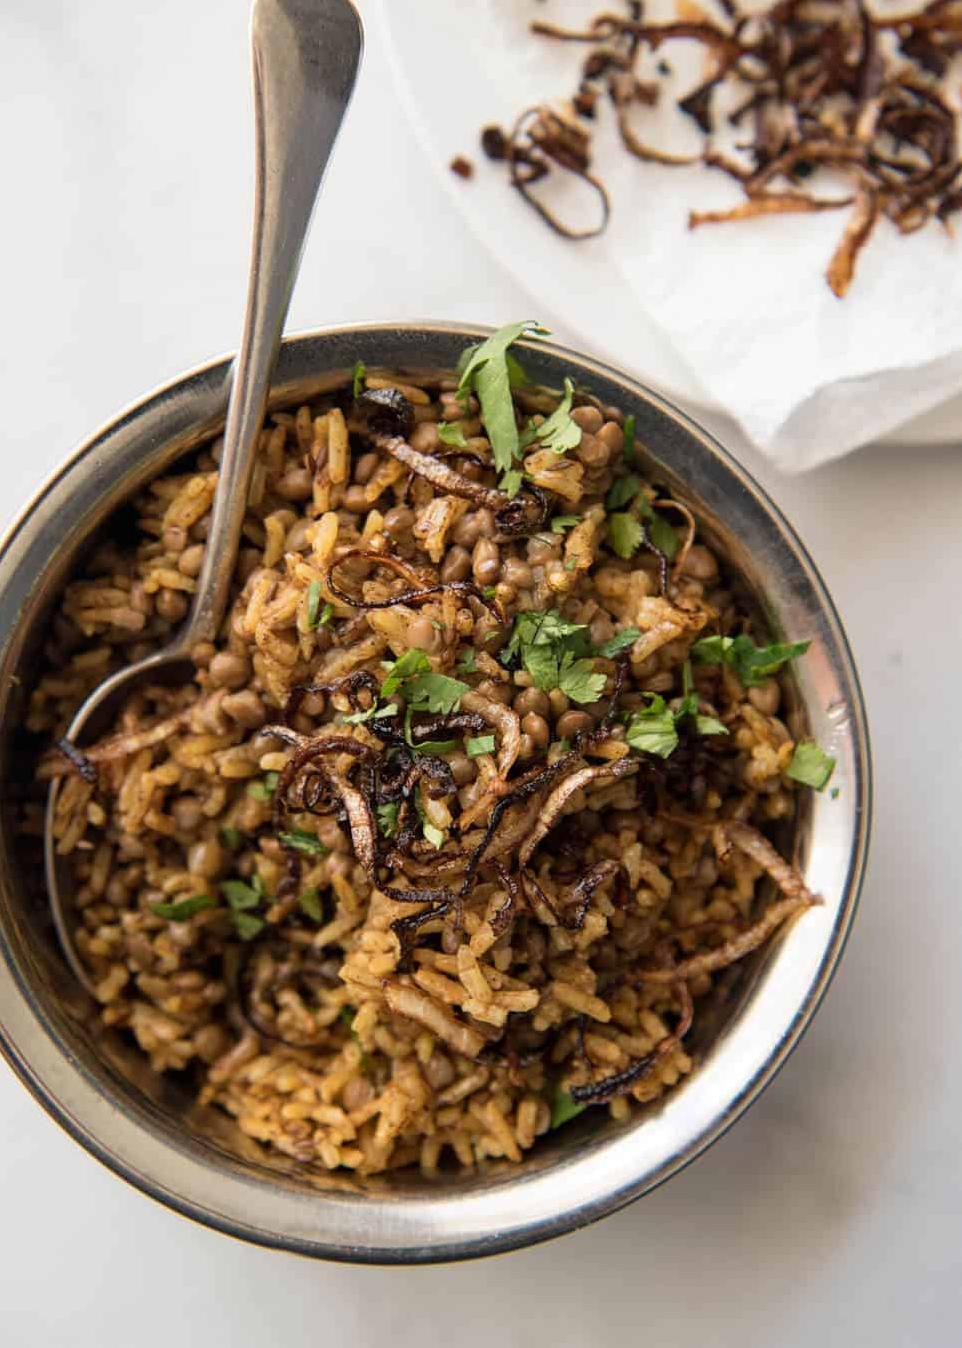  Made with fragrant spices, tender lentils, and fluffy rice, this is comfort food at its best